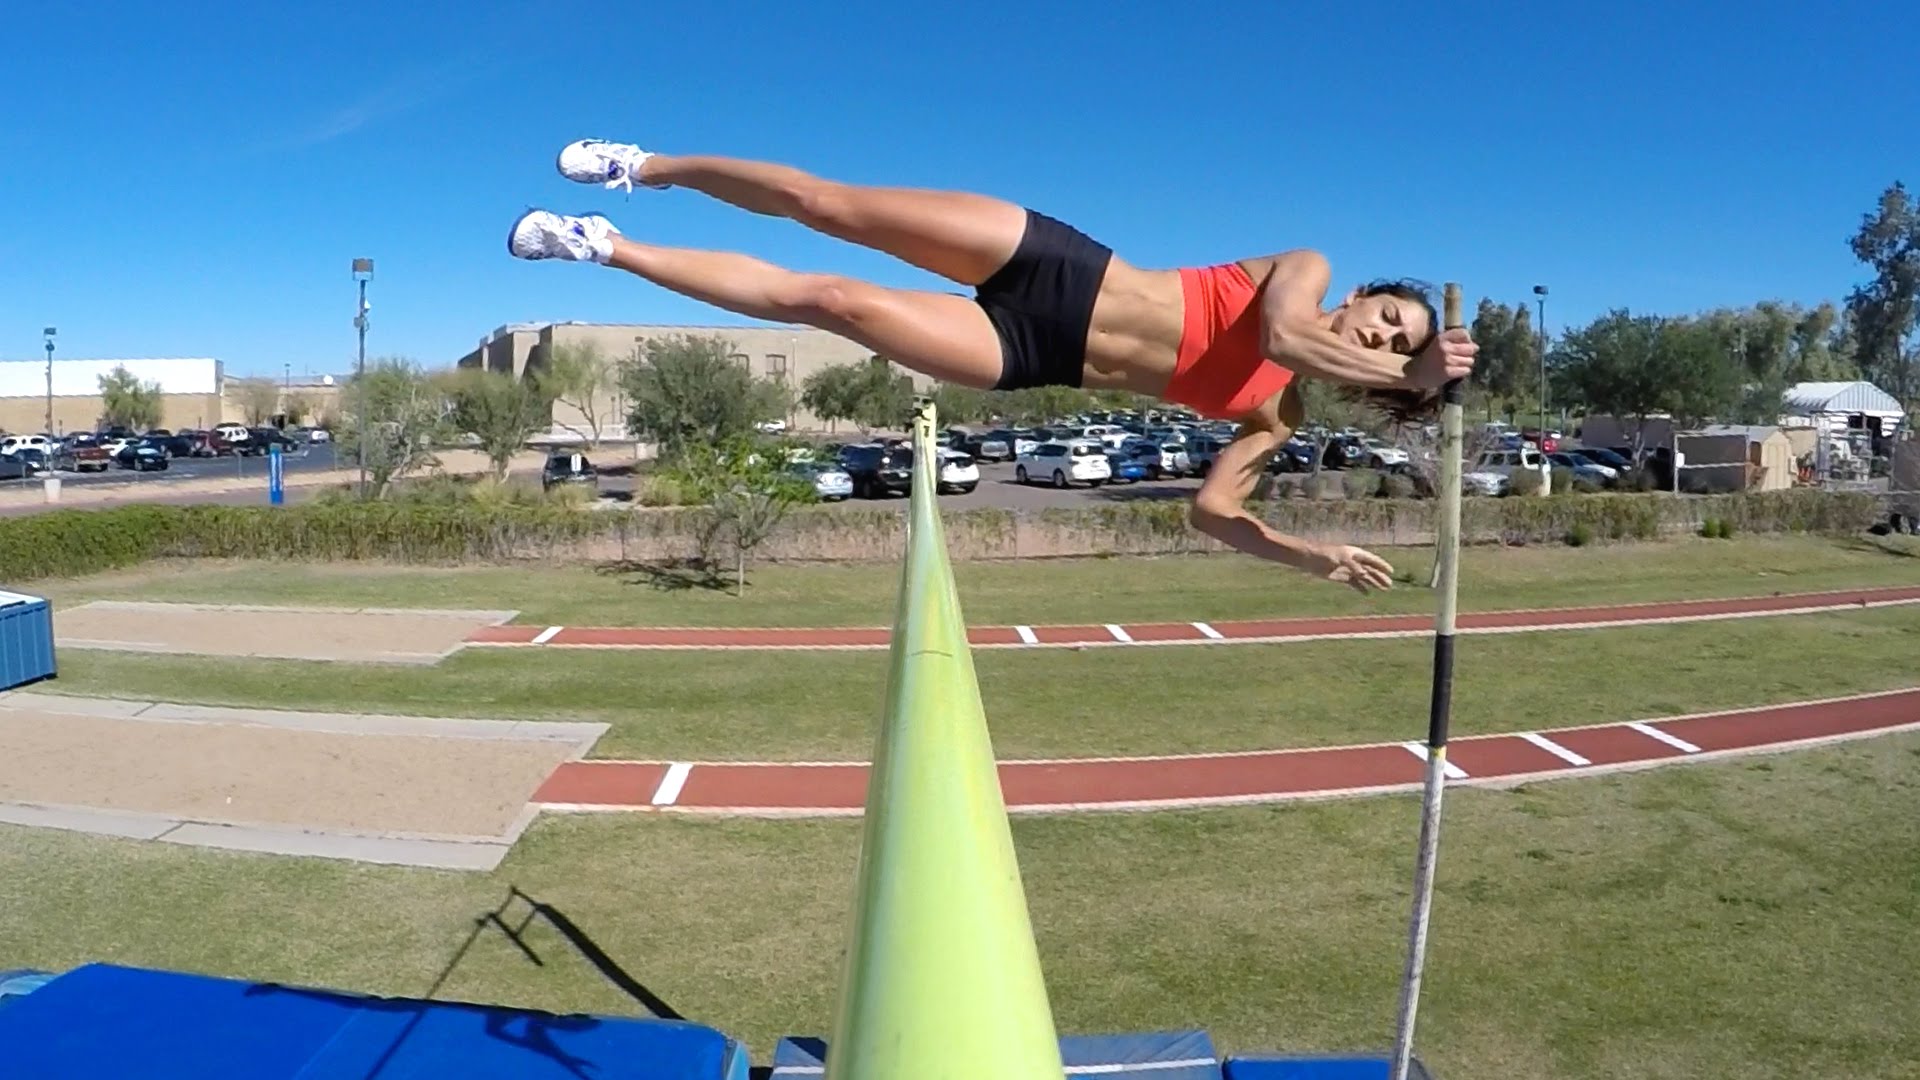 Allison Stokke Was A Viral Sensation But Where Is She Today Page